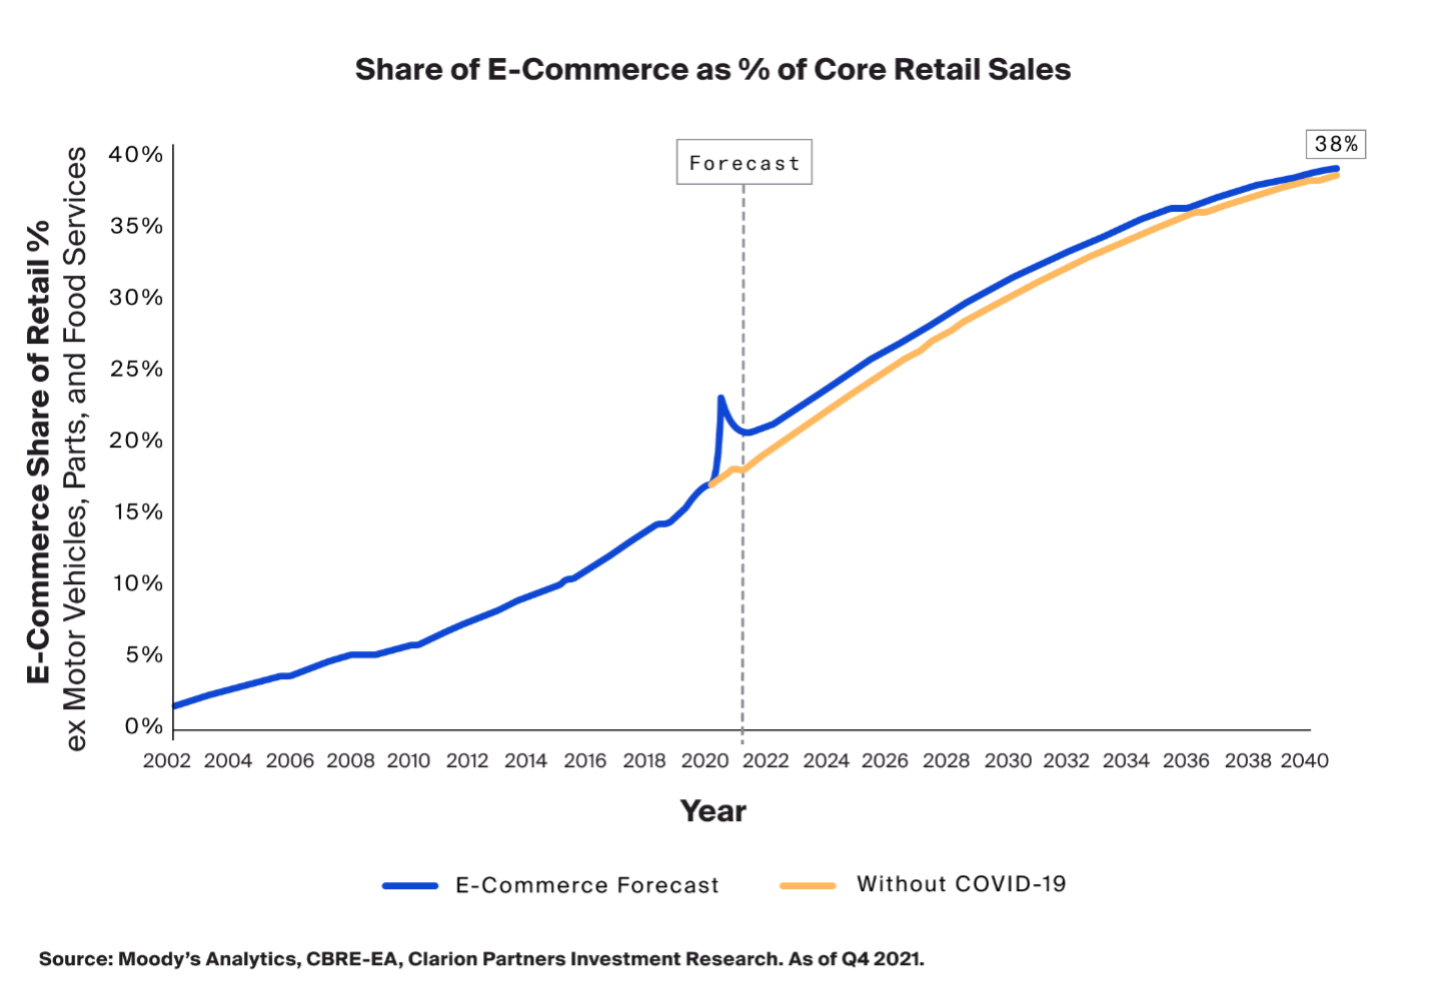 Share of E-Commerce as Percent of Core Retail Sales